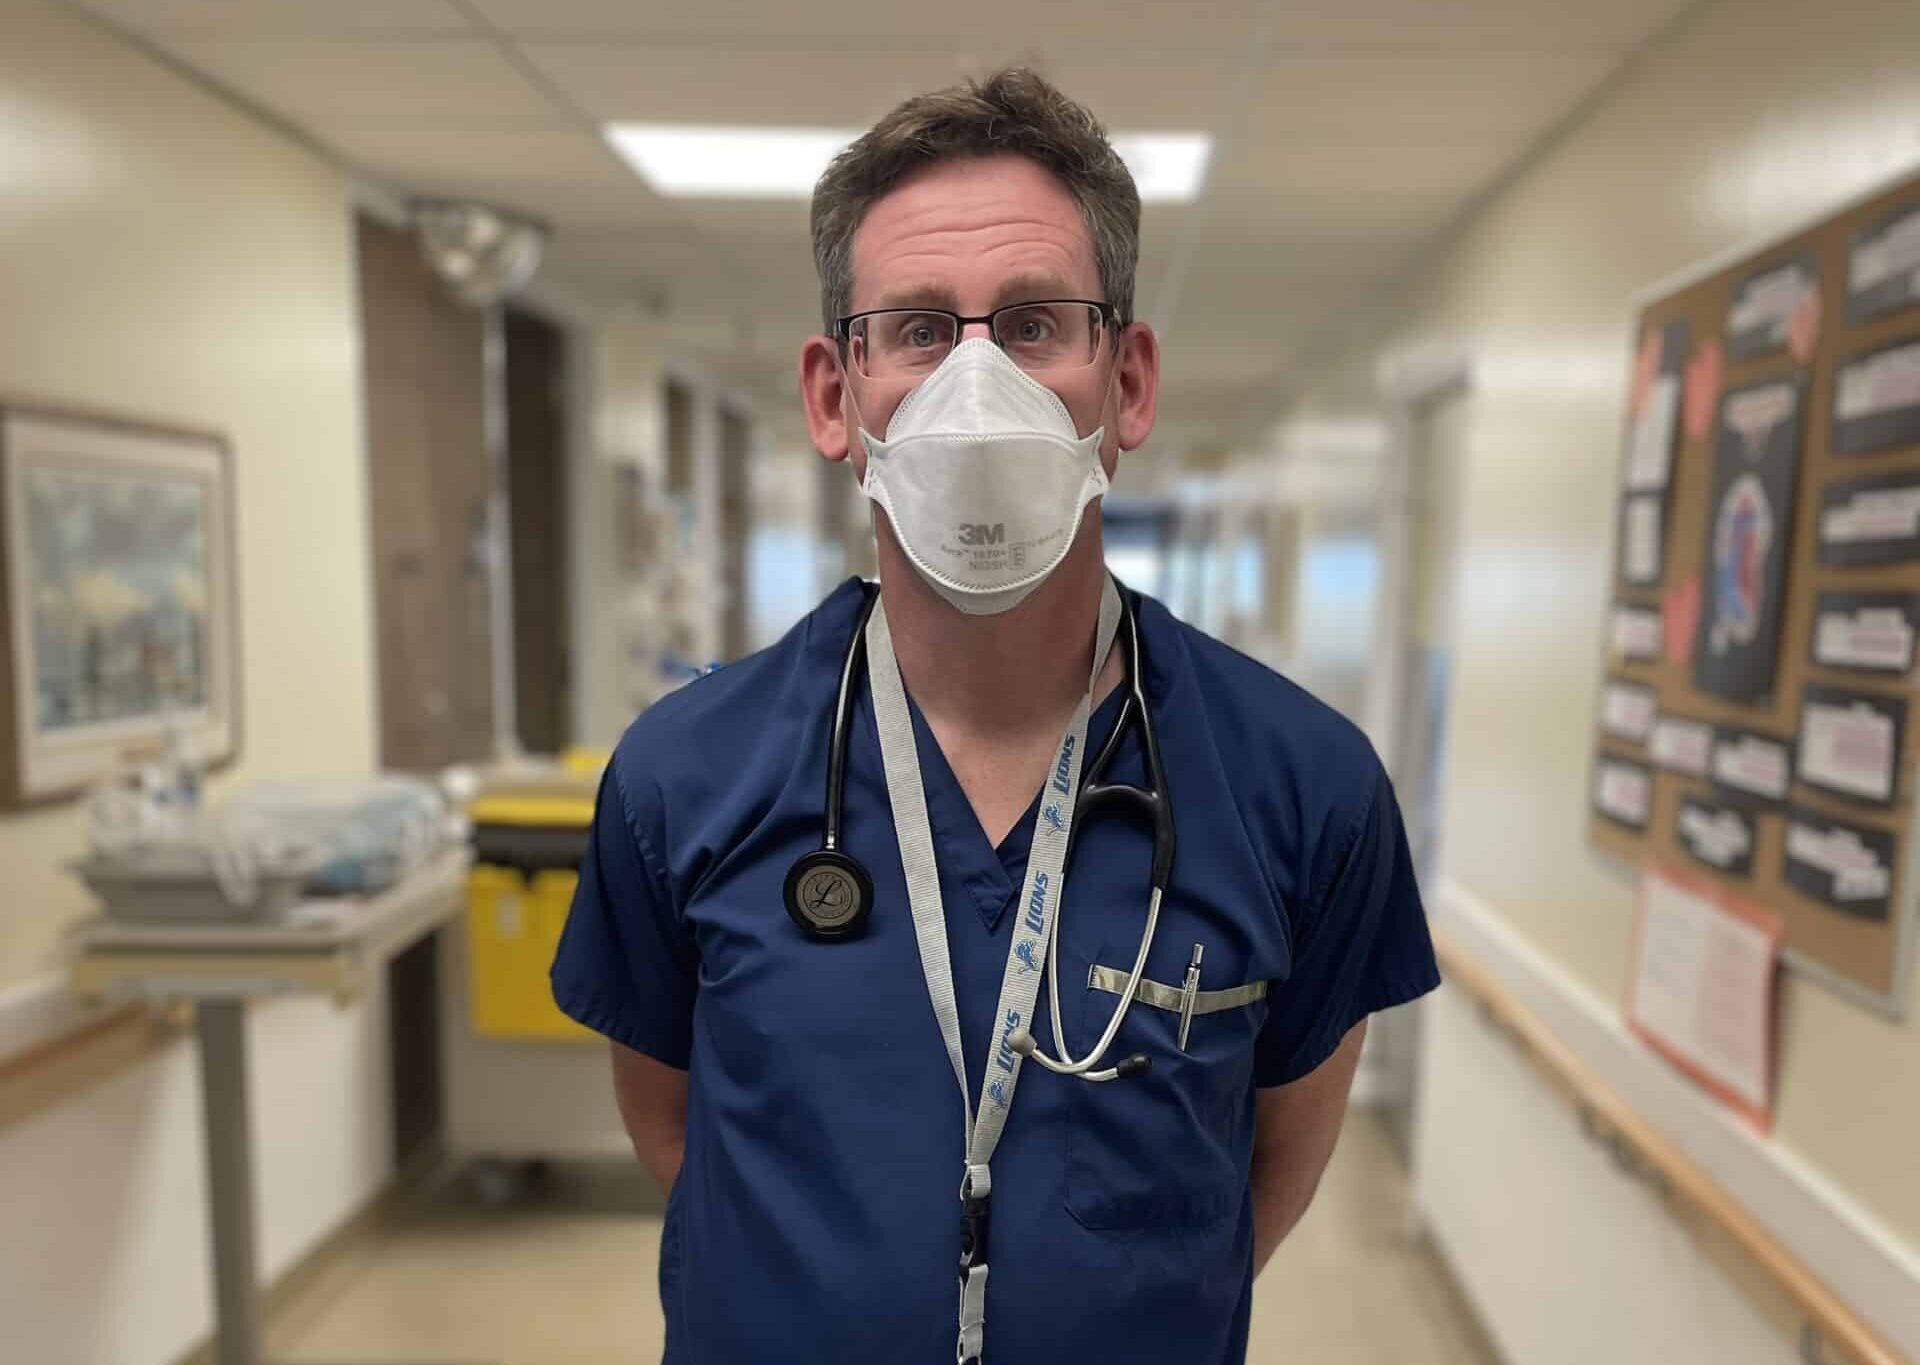 A doctor stands in a hallway wearing a mask.